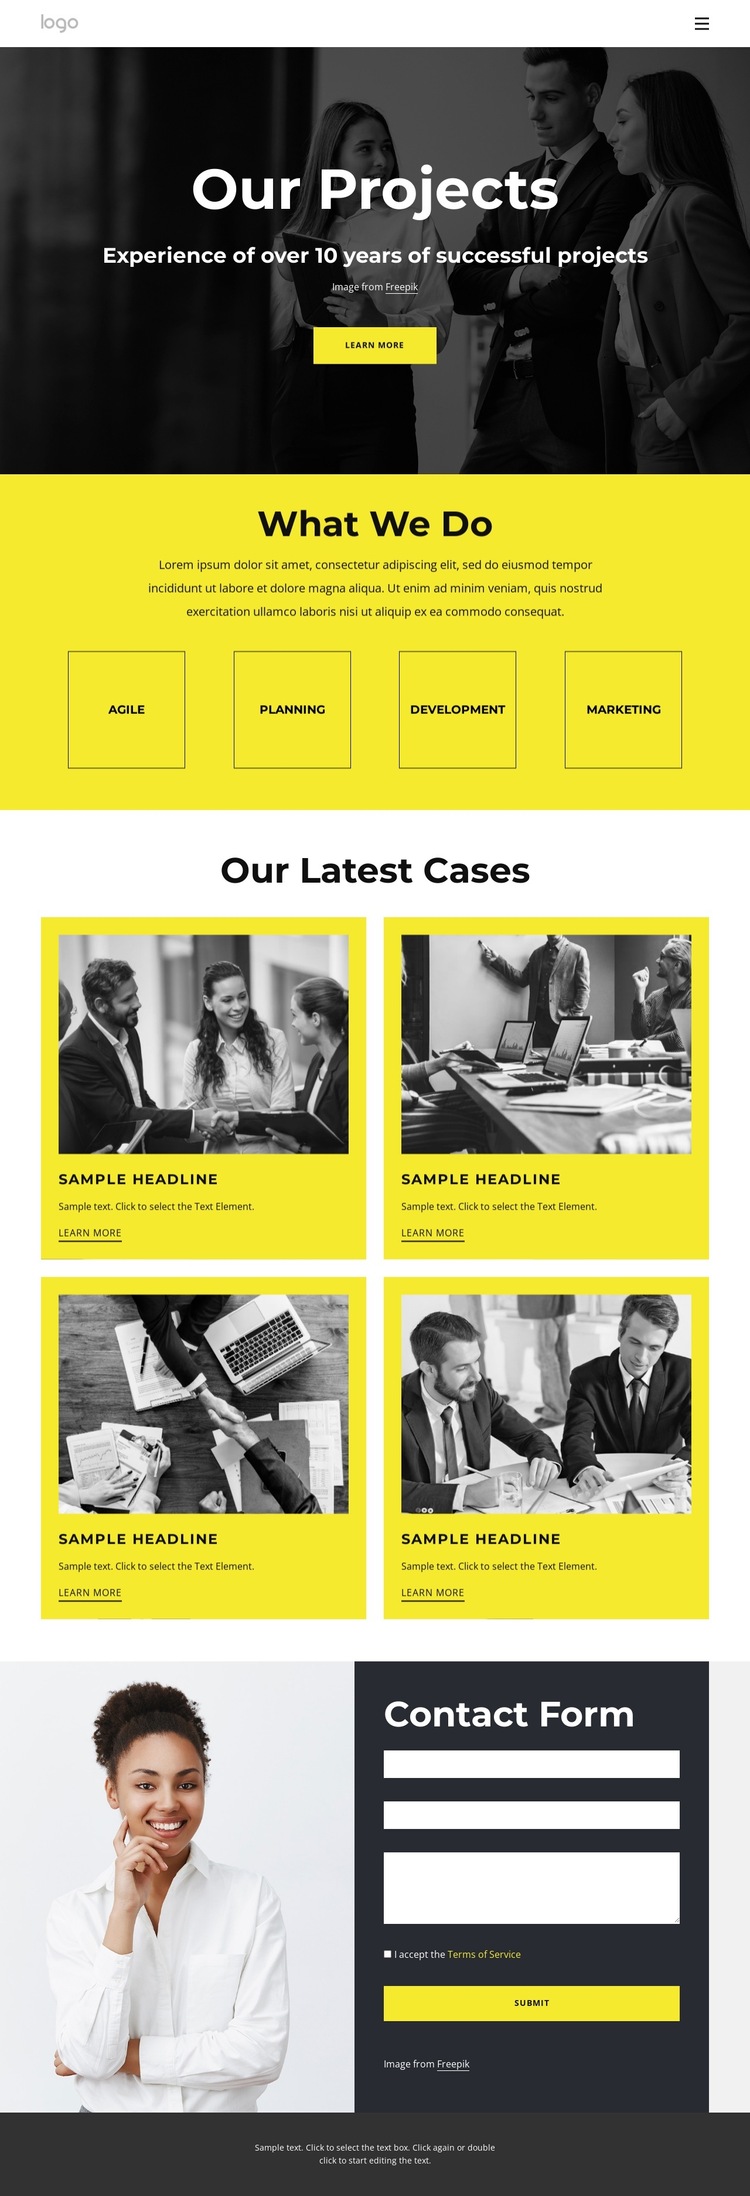 Our consulting success stories HTML5 Template